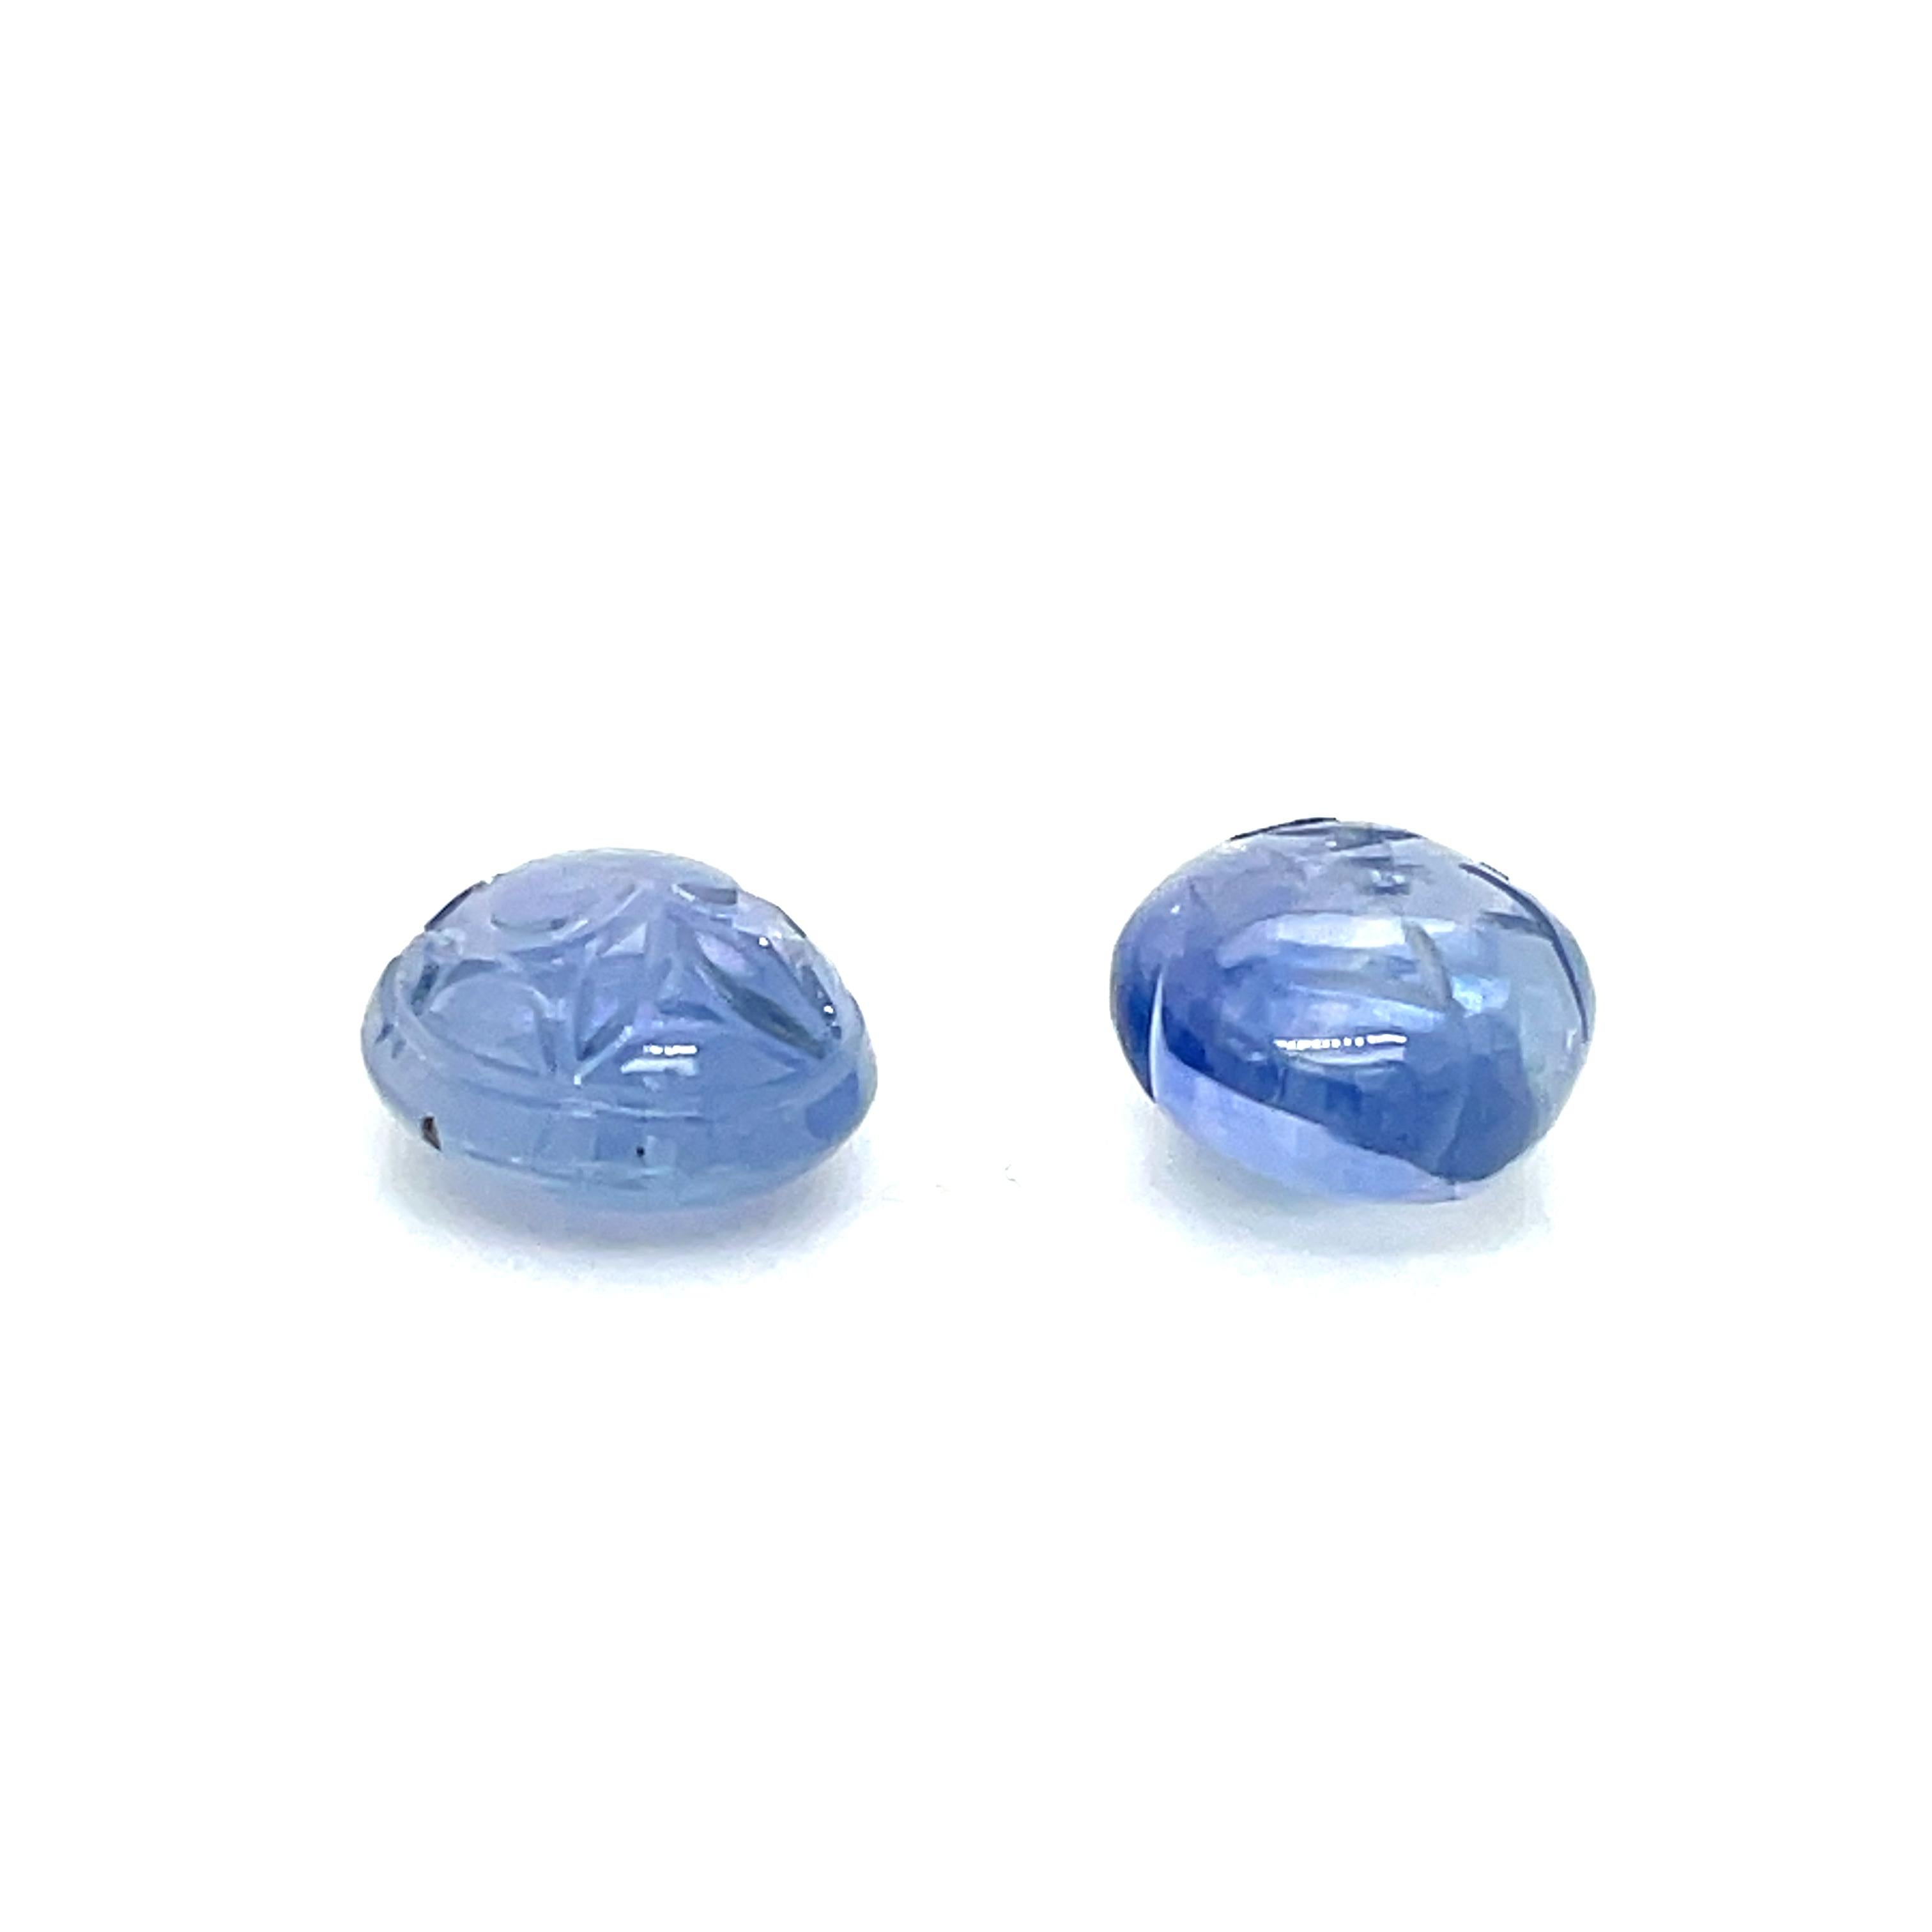 
Love and devotion are celebrated in these sapphire cabs.

The heart-shaped cabochon is adorned with the timeless message 